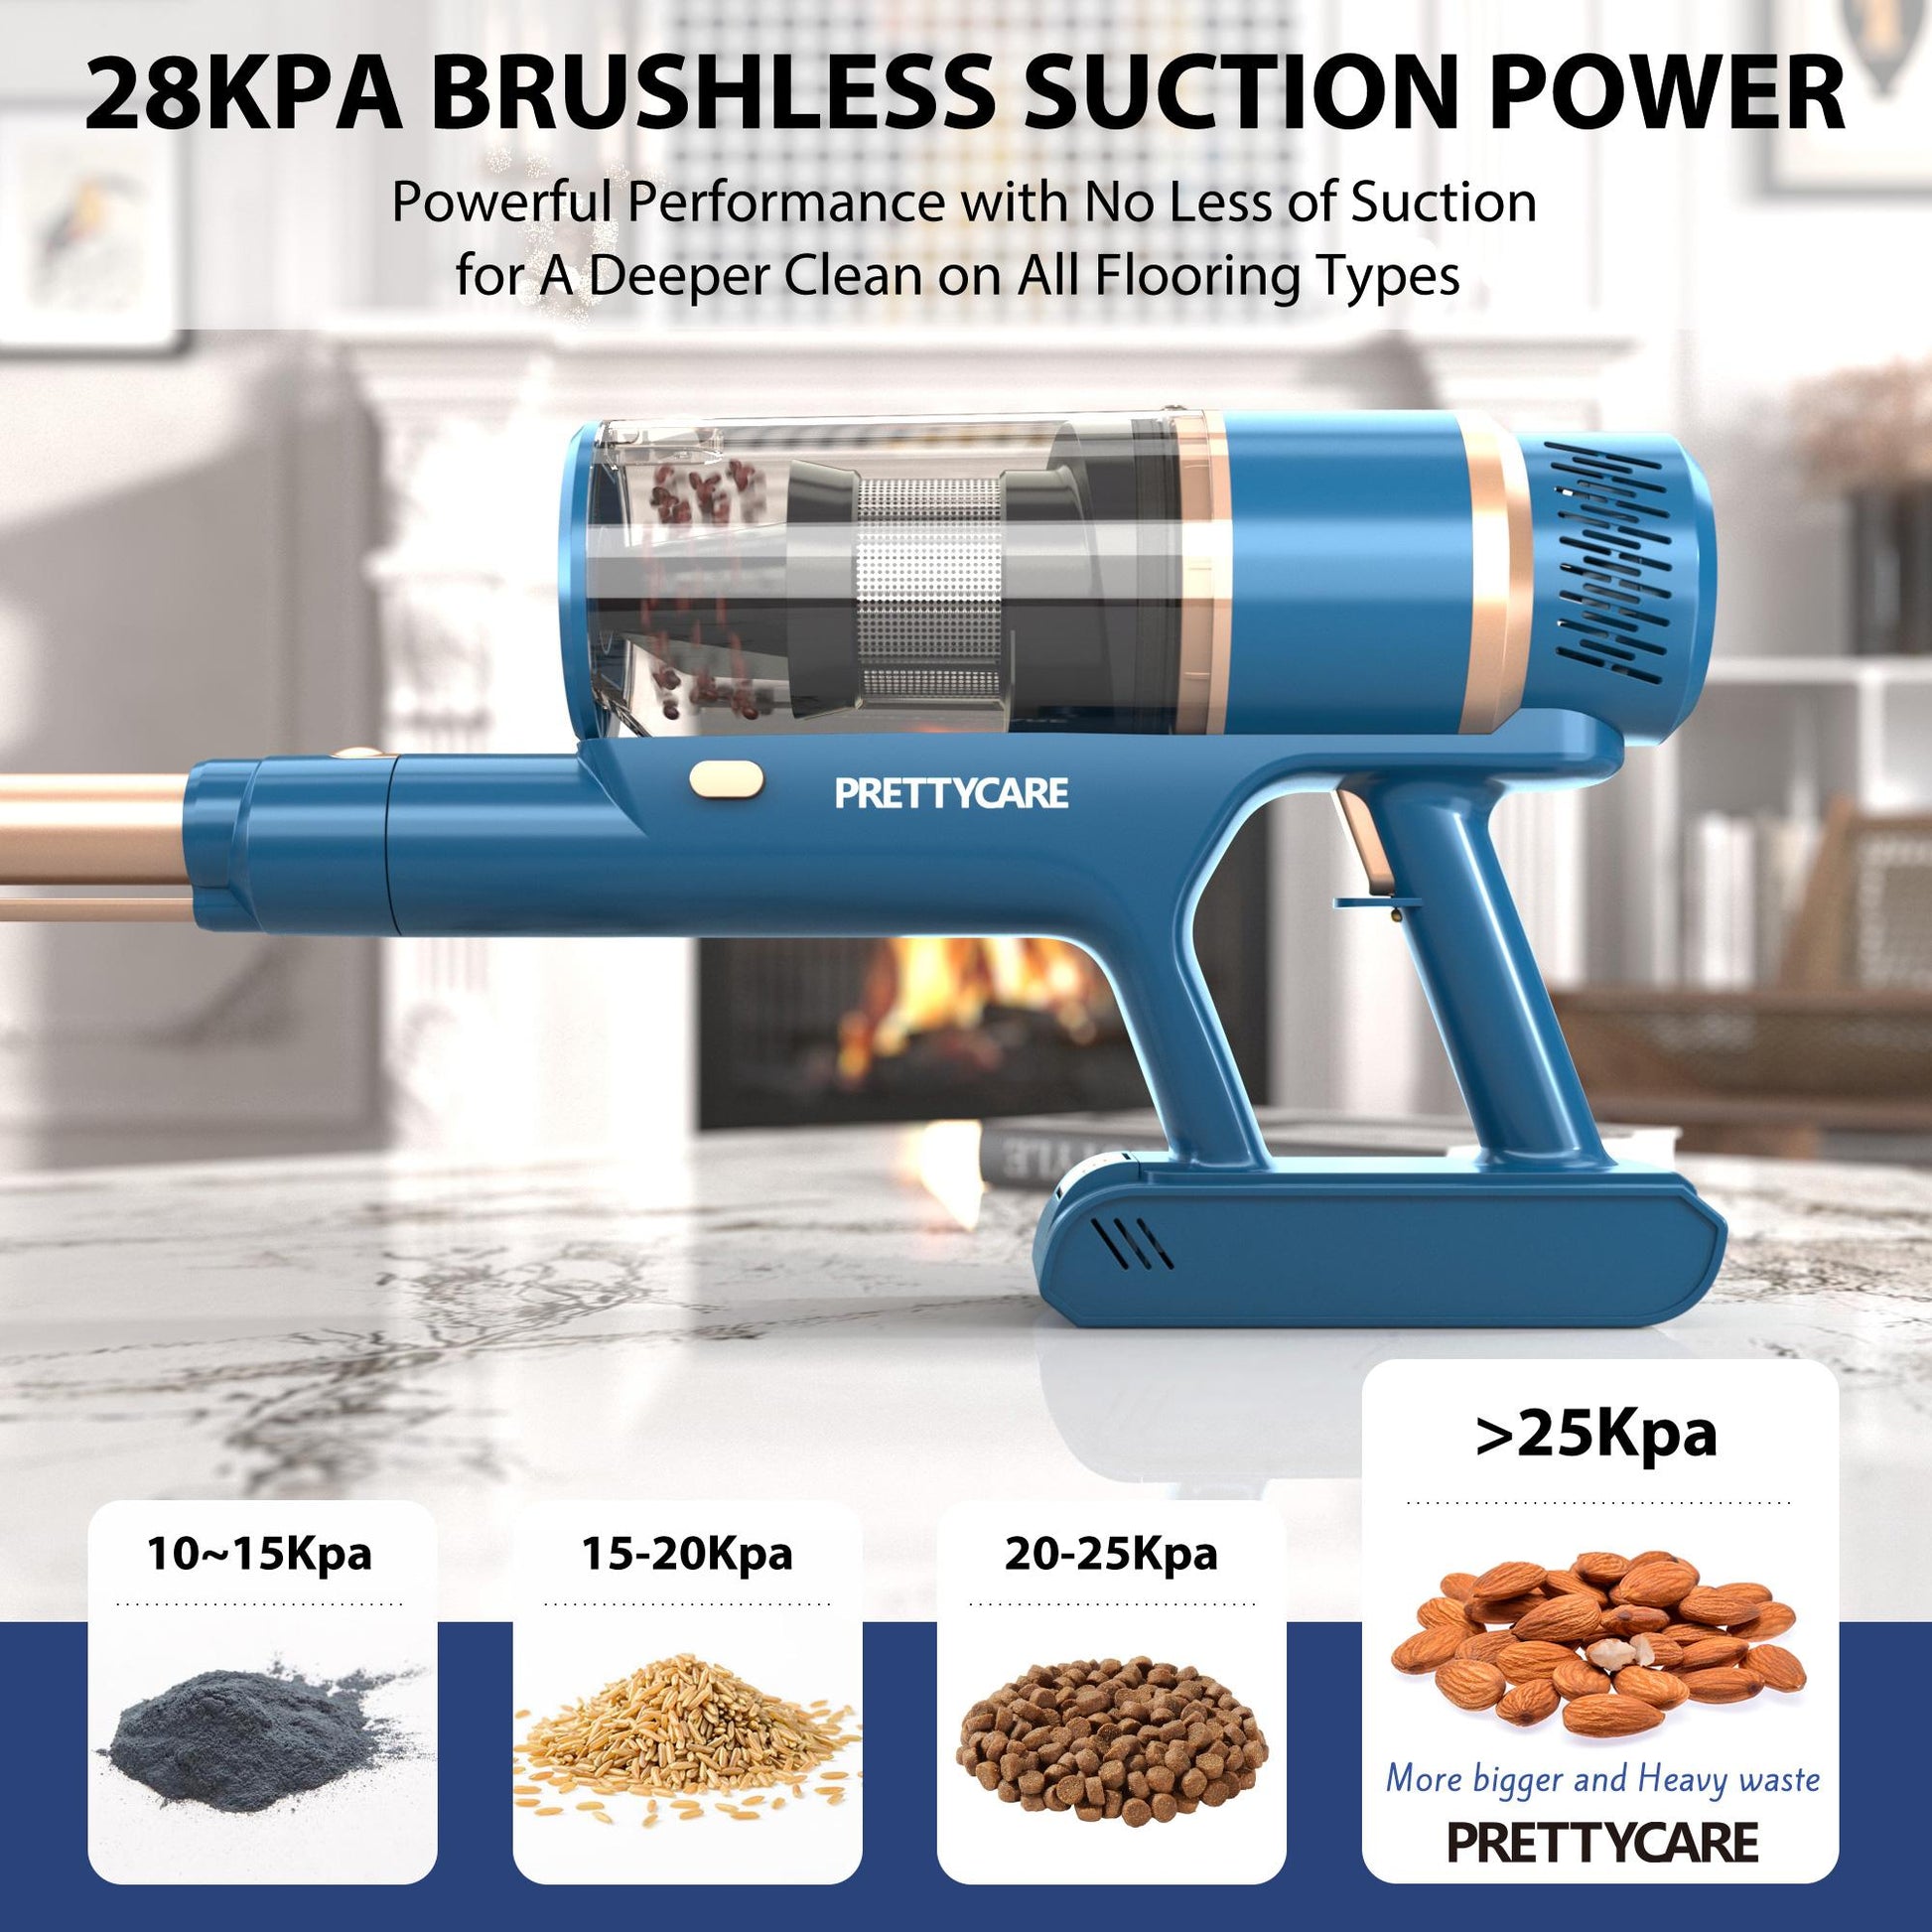 Pretty Care P2 Stick Vacuum Cleaner with 28KPa Brushless Suction Power. | Blue Chilli Electronics.